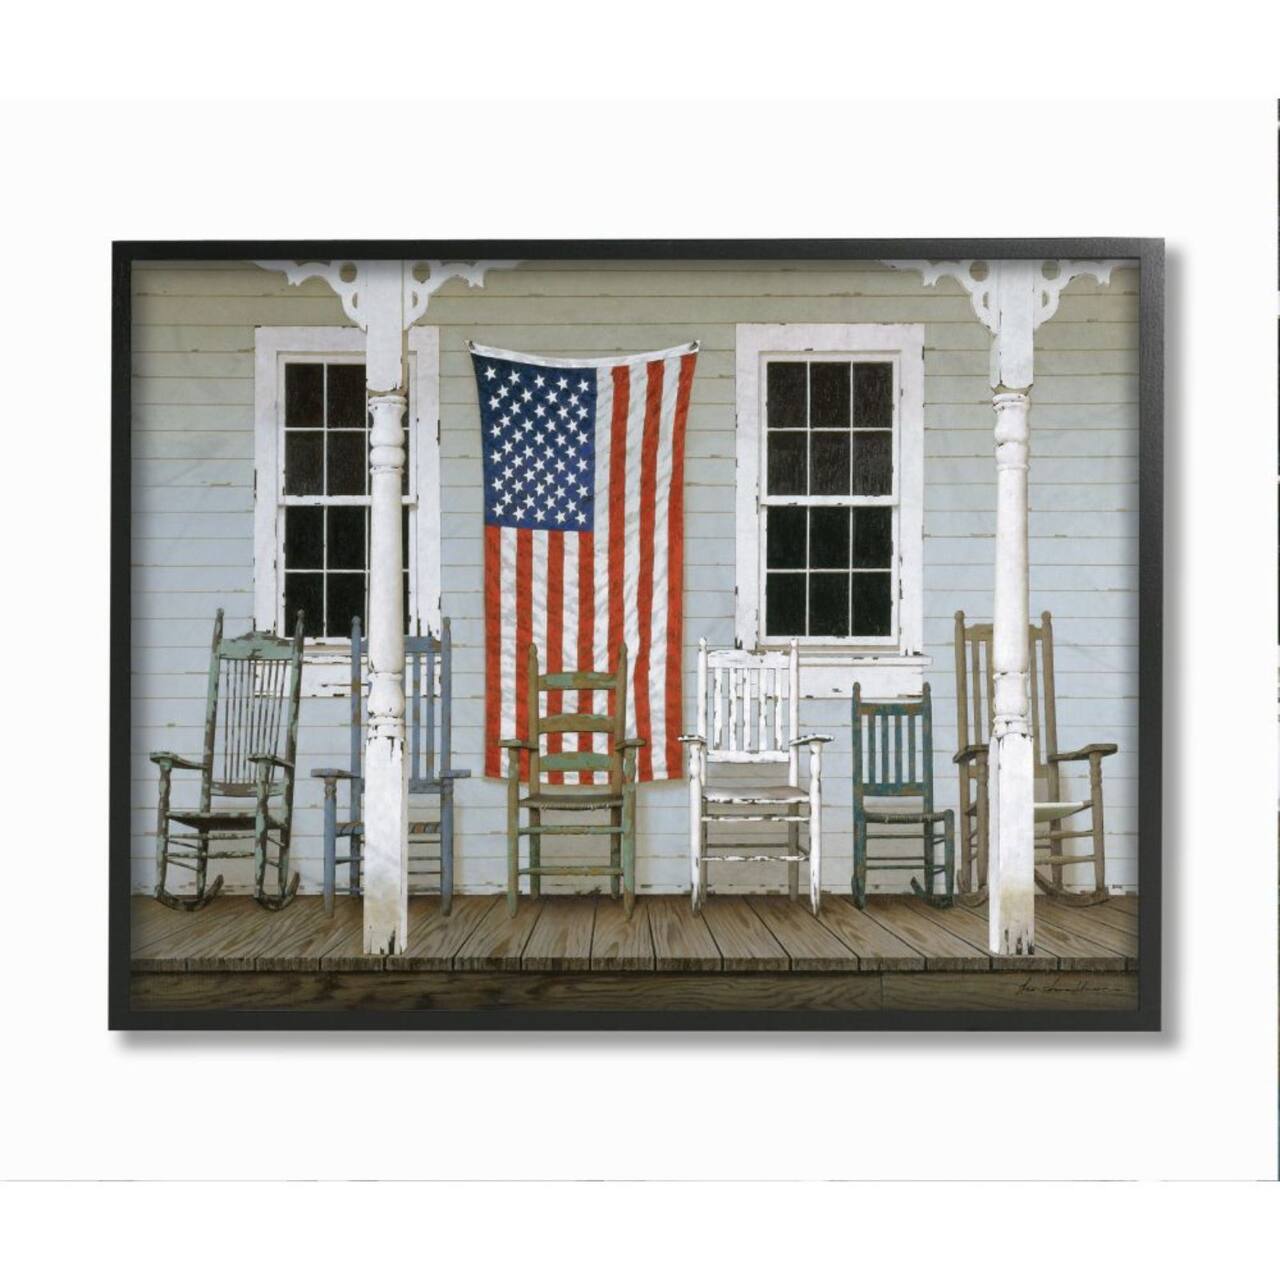 Stupell Industries Distressed Rocking Chair Porch Americana Black Framed Wall Art